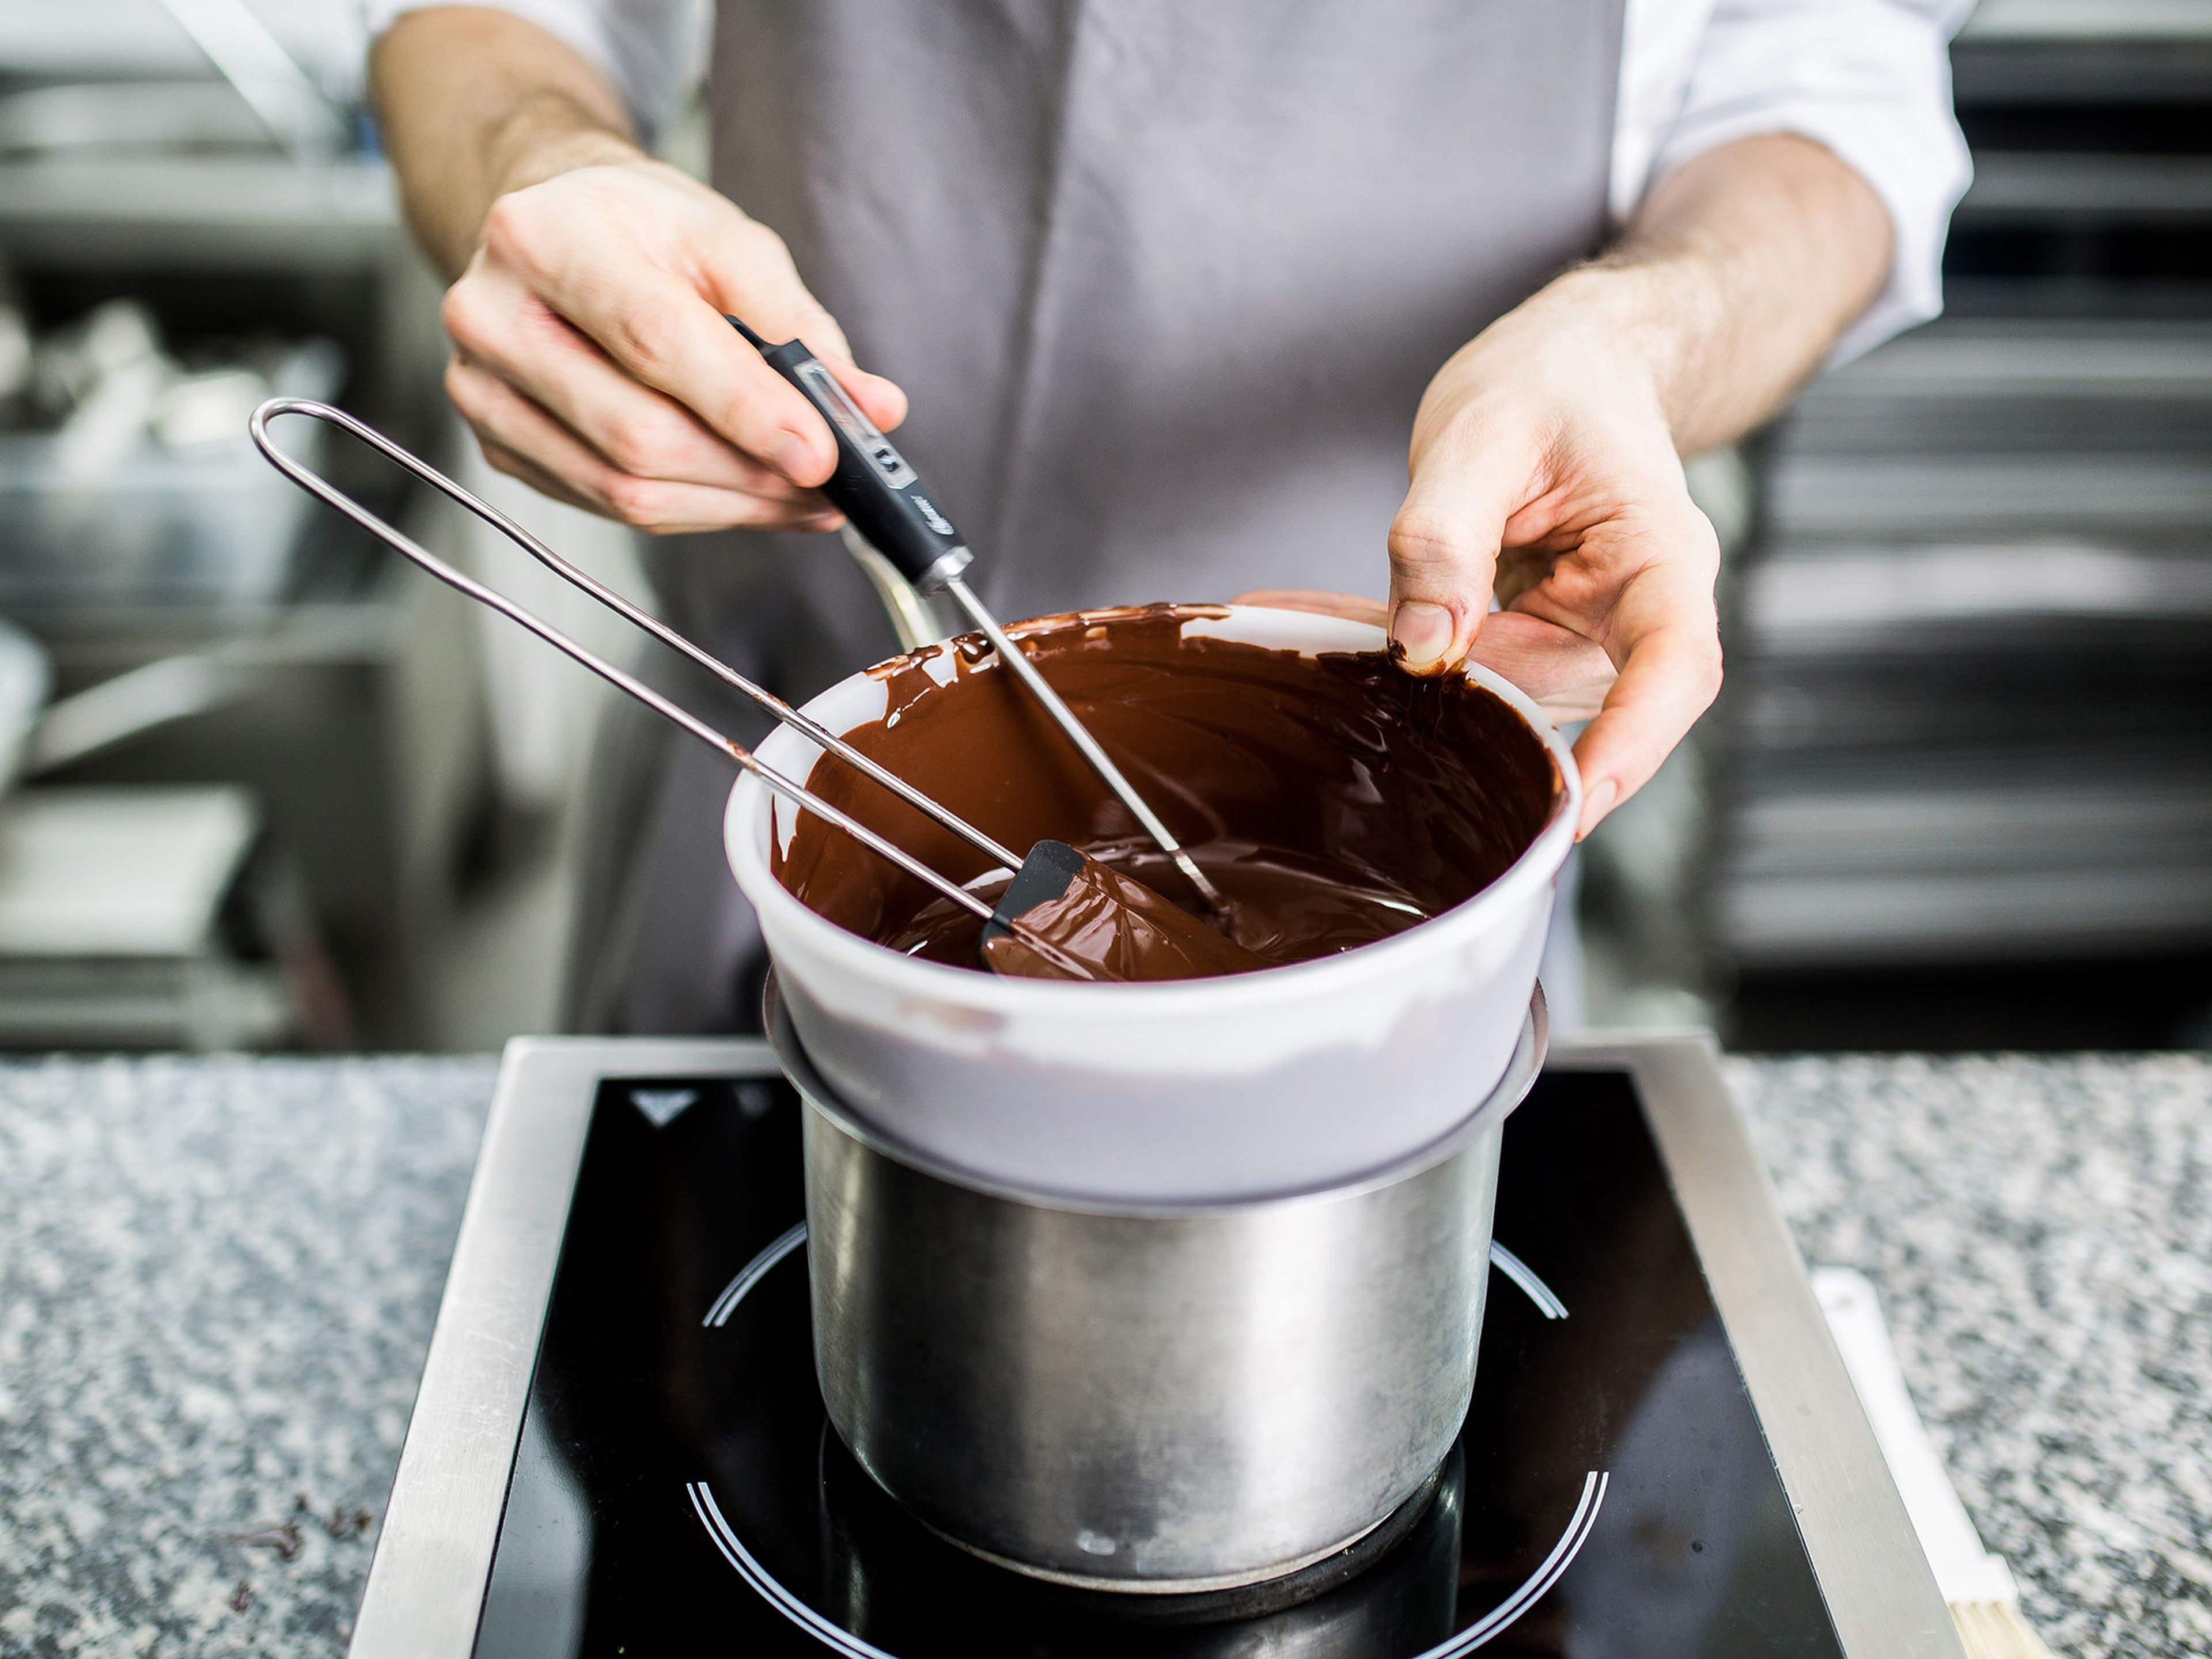 Set up a double-boiler by placing a heatproof bowl over a small pot of simmering water. Place half of the chocolate in the heatproof bowl and melt. Take off heat once it has reached 50°C/122°F. Set aside. Add rest of chocolate and gently stir.